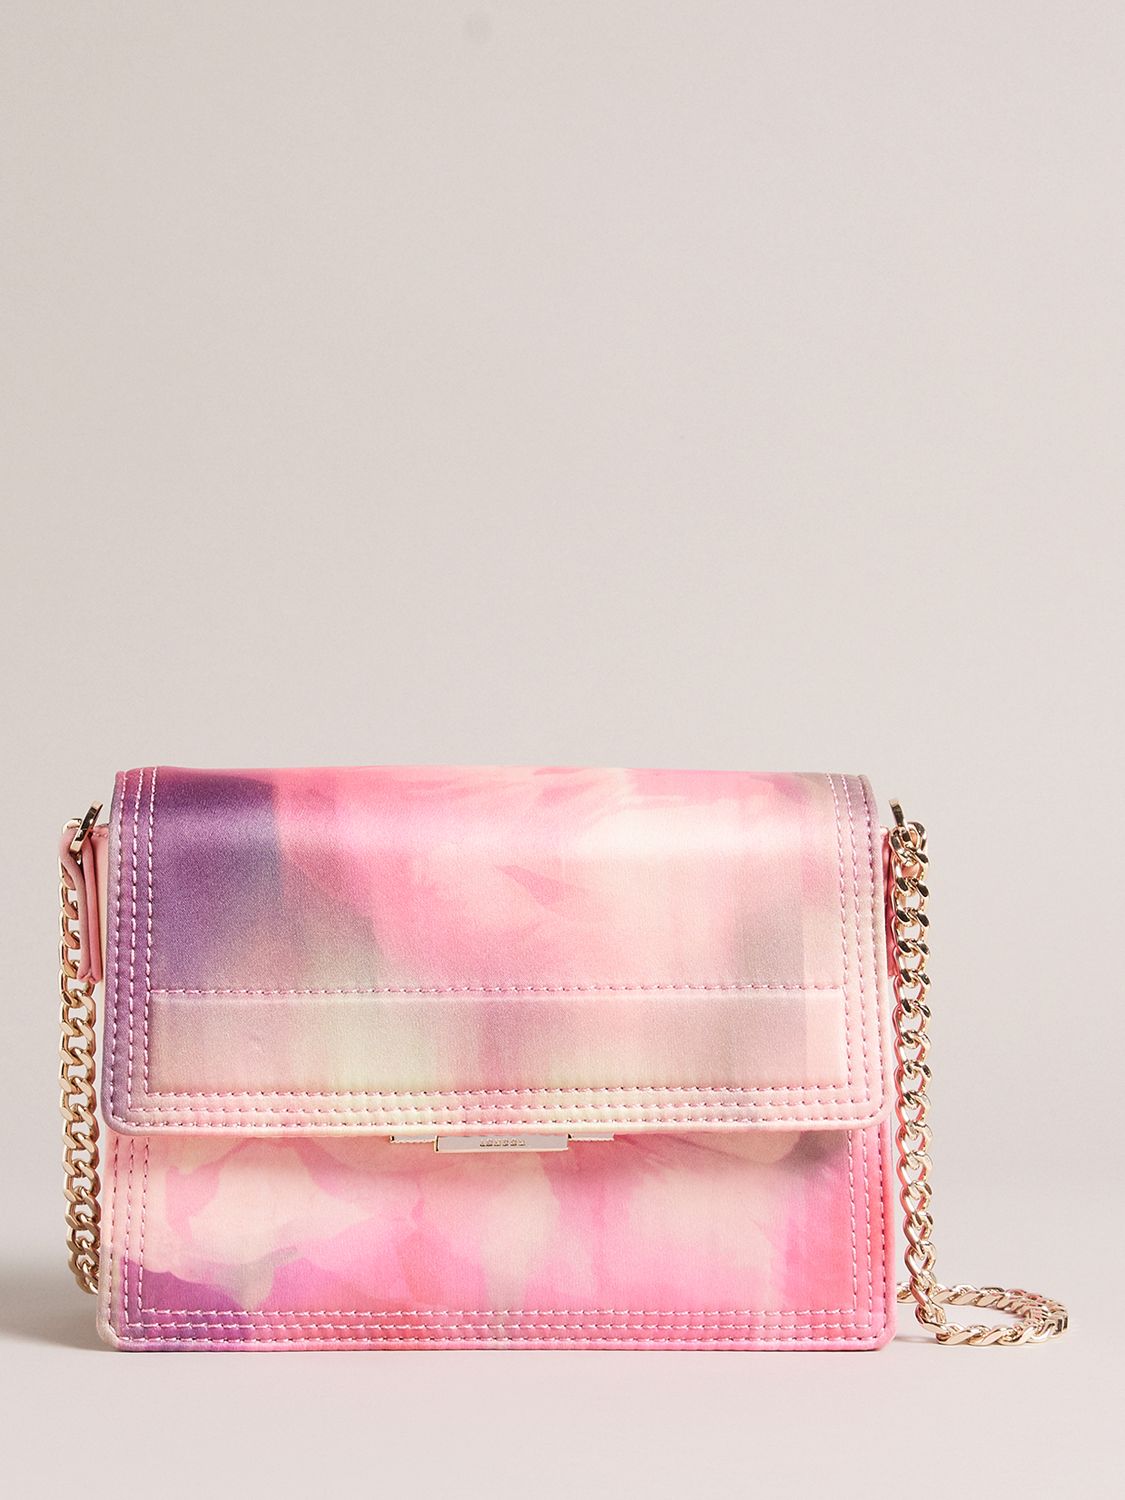 Ted Baker Floral Fashion Bag  Floral clutch bags, Girly bags, Bags